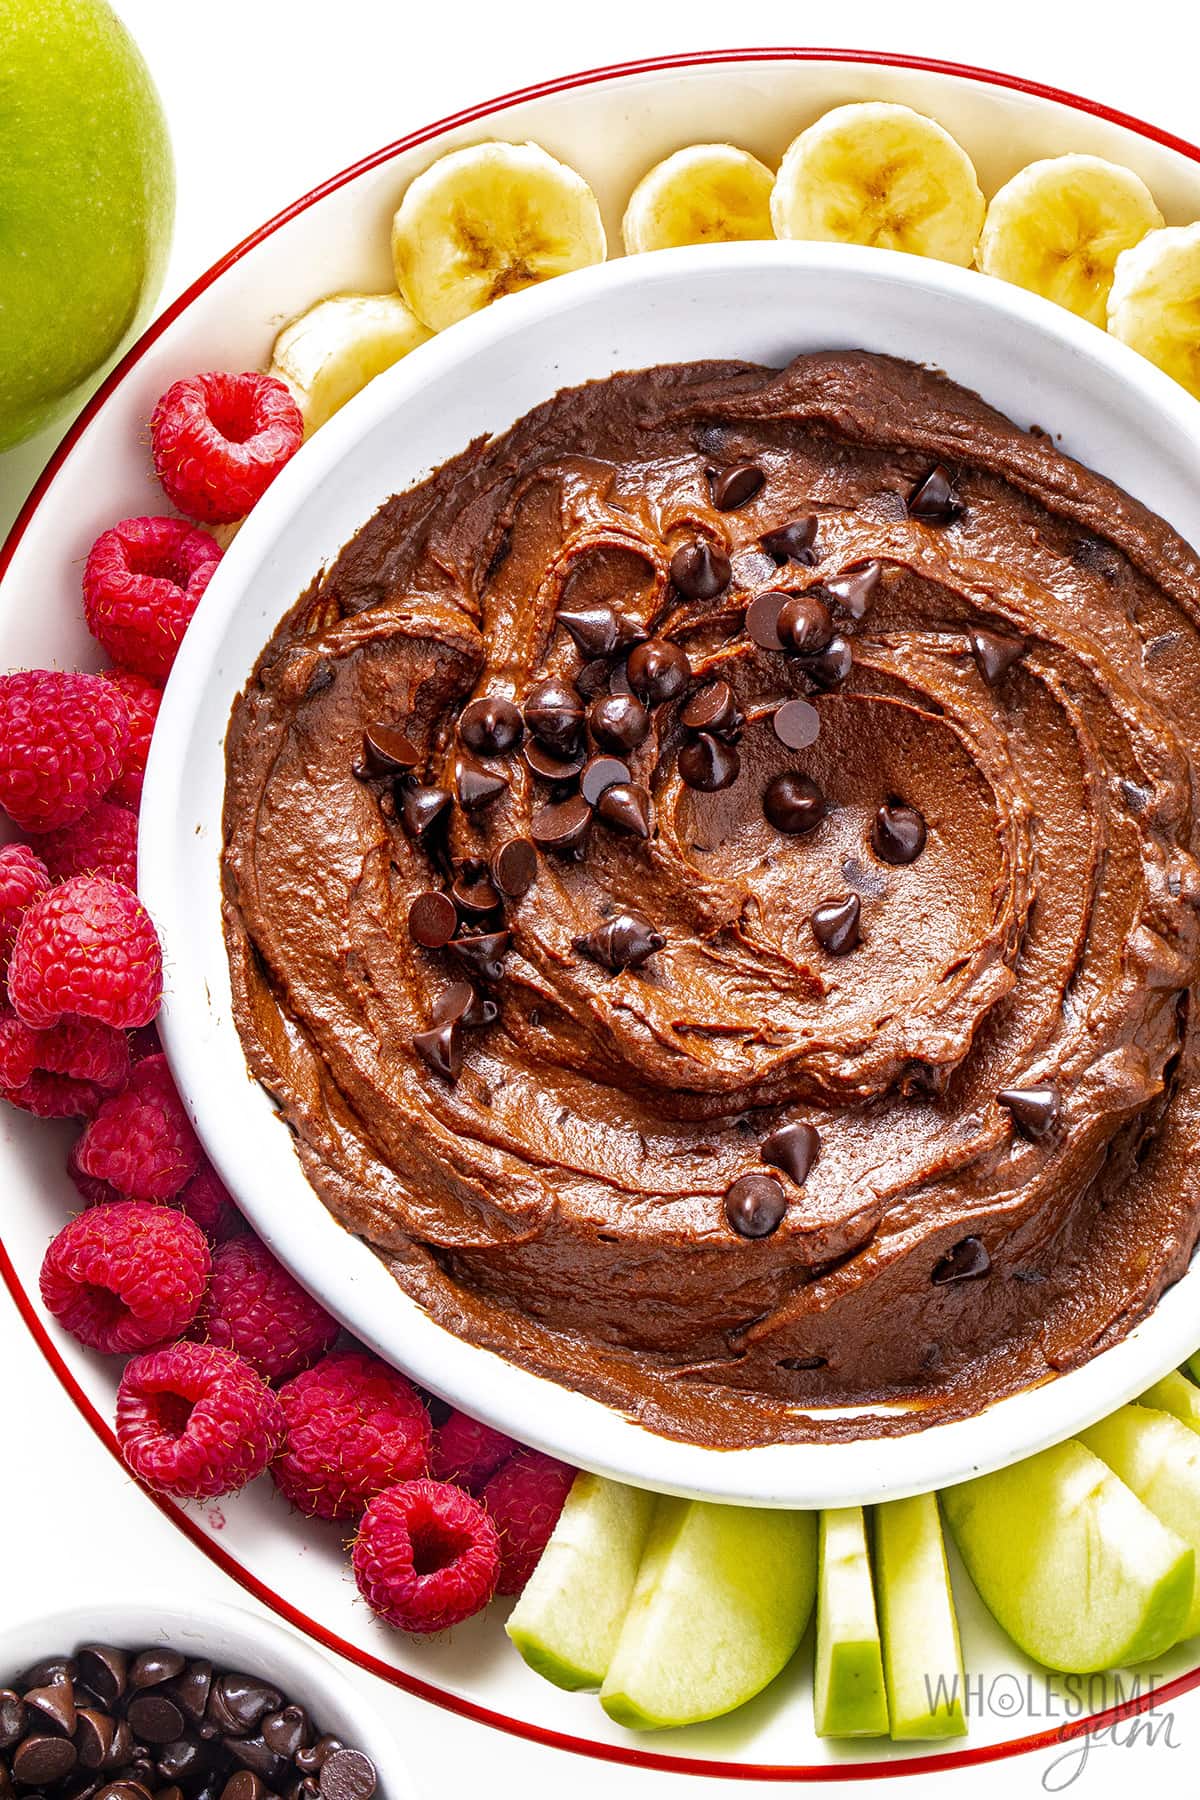 Bowl of chocolate hummus on a platter with fruit.